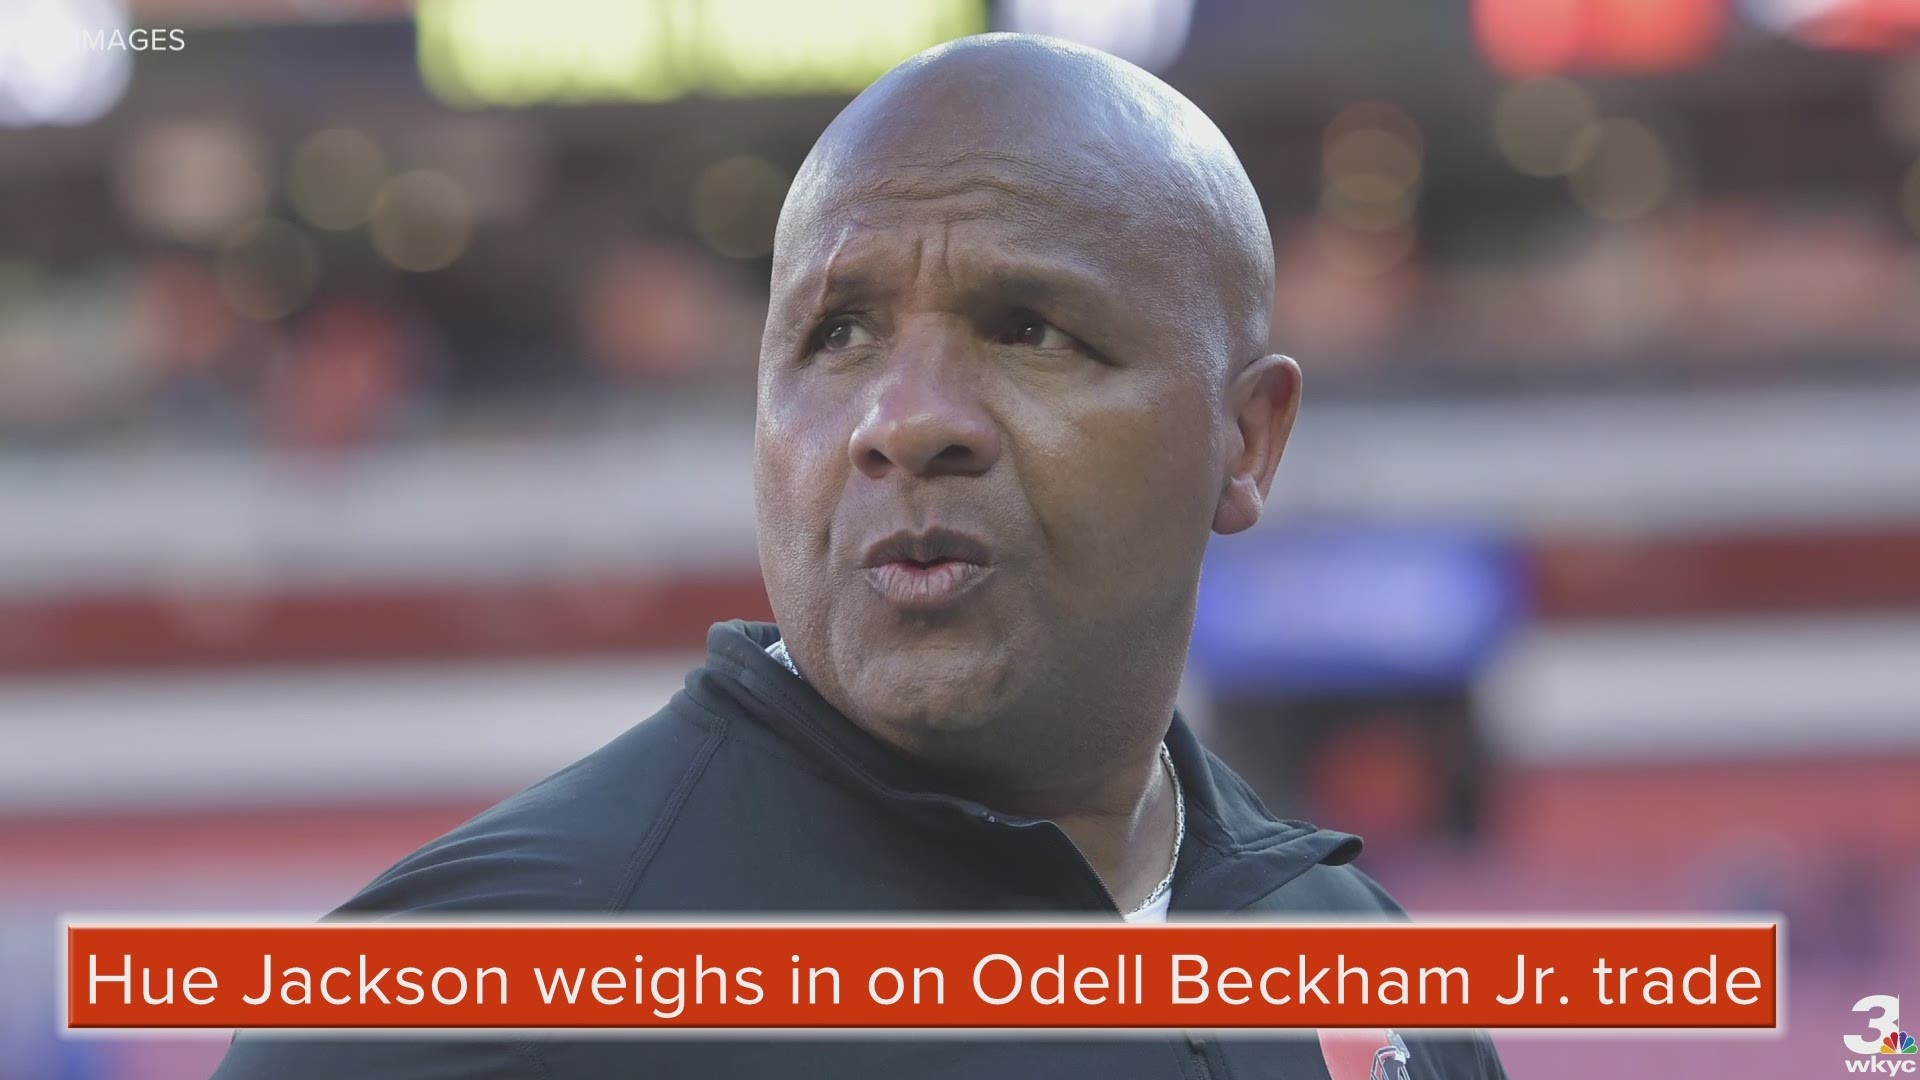 Hours after the Cleveland Browns agreed to a trade to a trade to acquire Odell Beckham Jr. from the New York Giants, former head coach Hue Jackson took to Twitter to congratulate his former team.